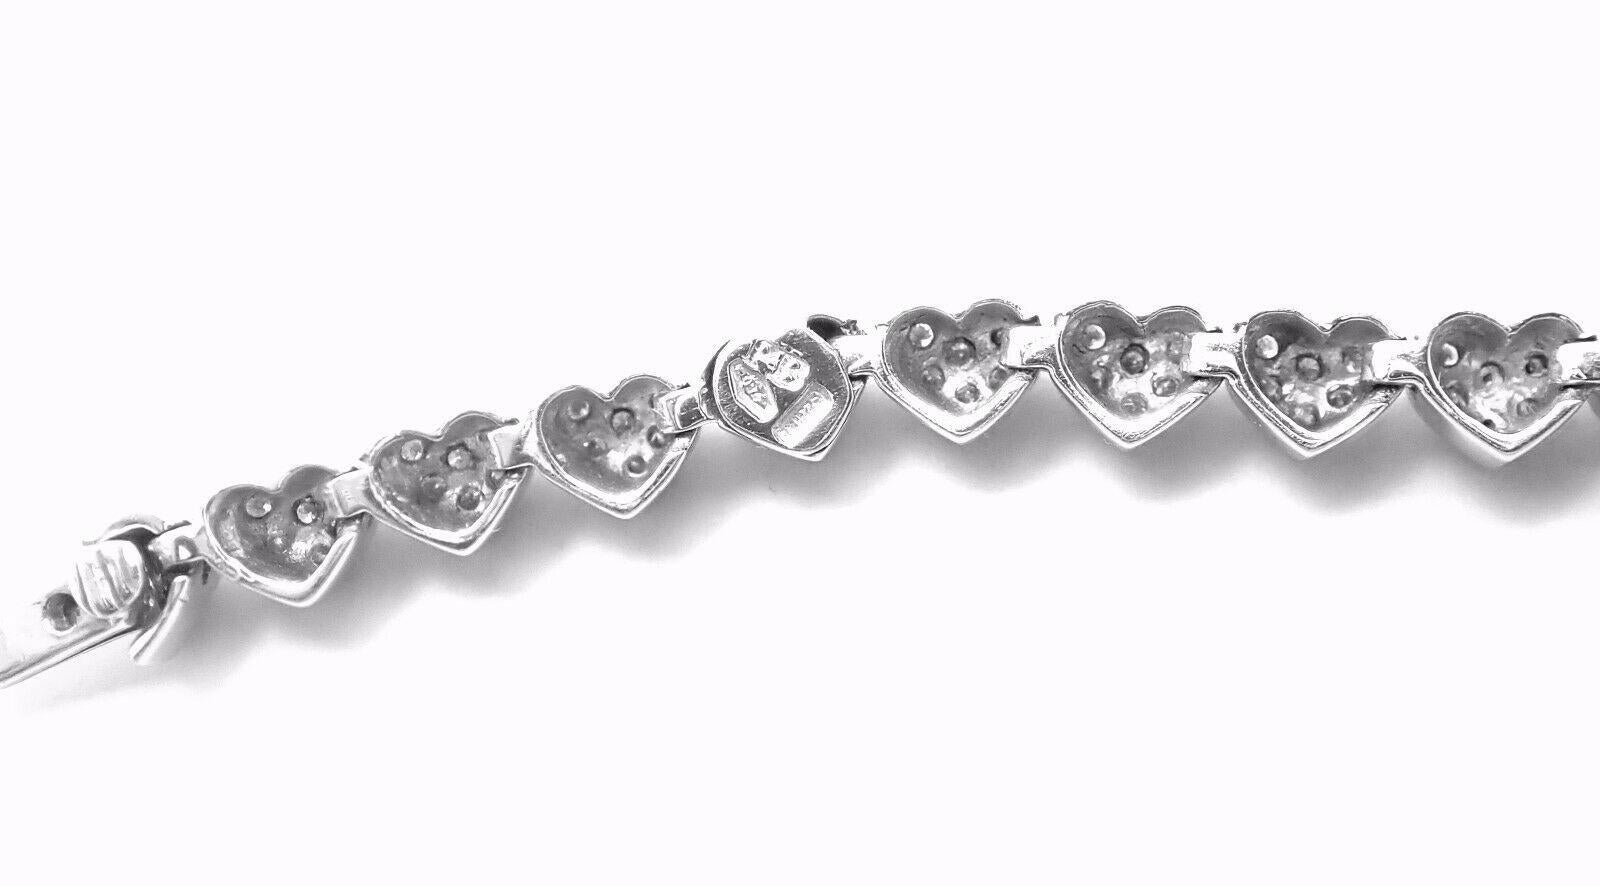 18k White Gold Diamond Heart Tennis Bracelet by Pasquale Bruni.
With 204 round brilliant cut diamonds VS1 clarity, G color total weight approx. 1.53ct
This bracelet comes with Box and Certificate.
Details:
Length: 7 inches long
Weight: 18.9